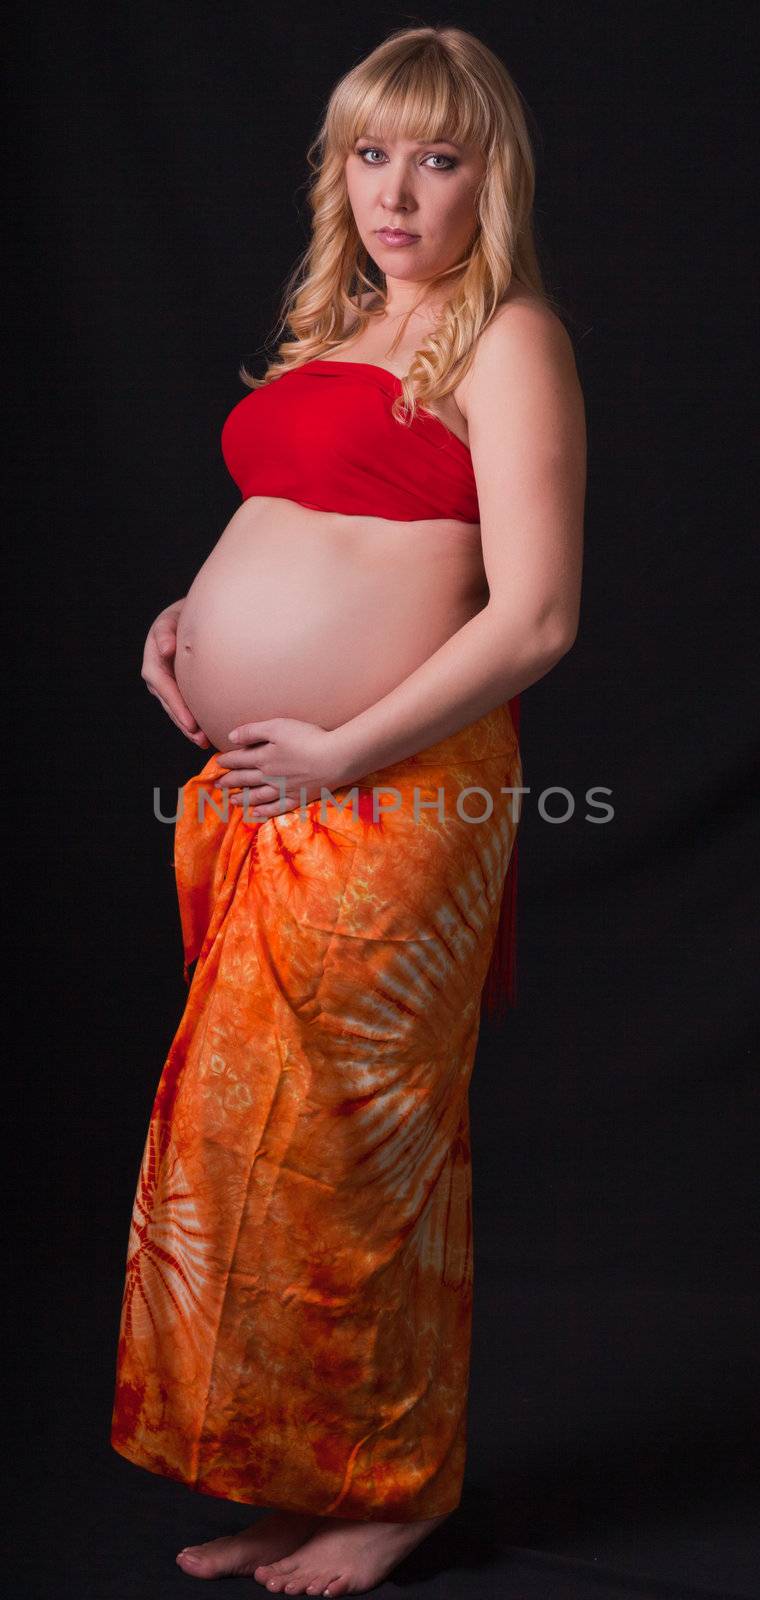 art portrait of pregnant woman on a black background by Sergieiev